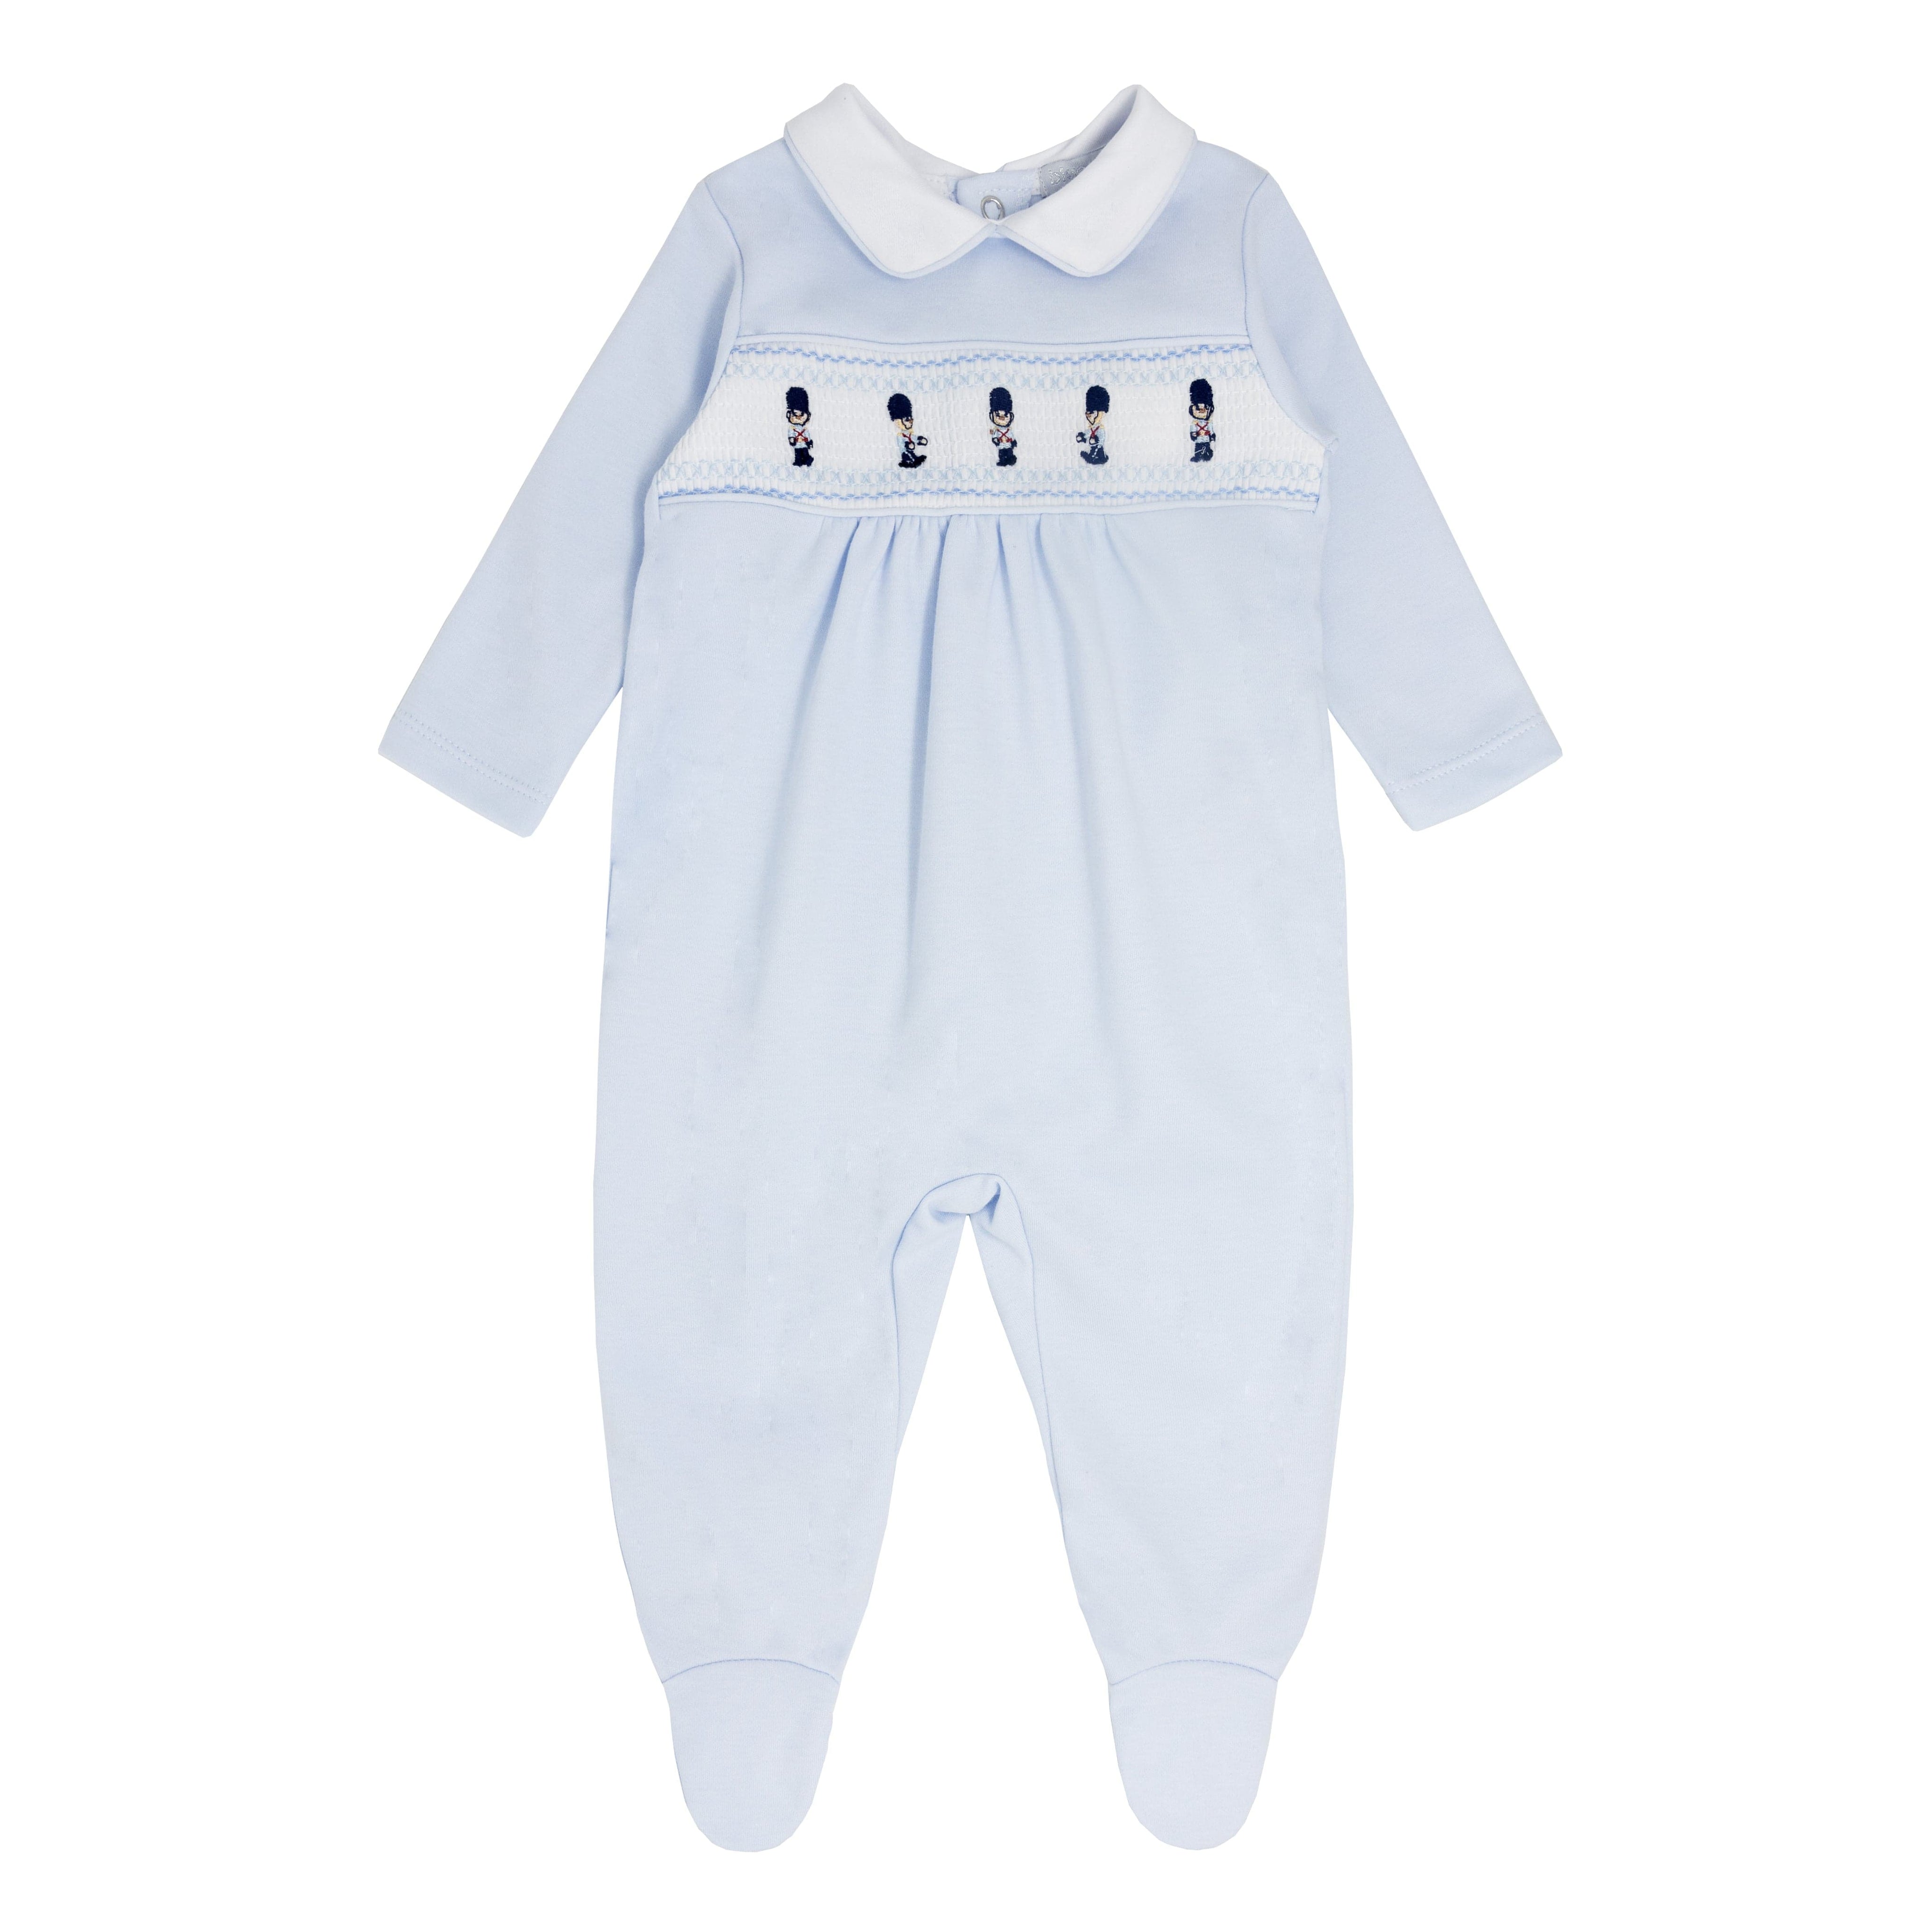 BLUES BABY - Solider Smocked Cotton Babygrow - Blue